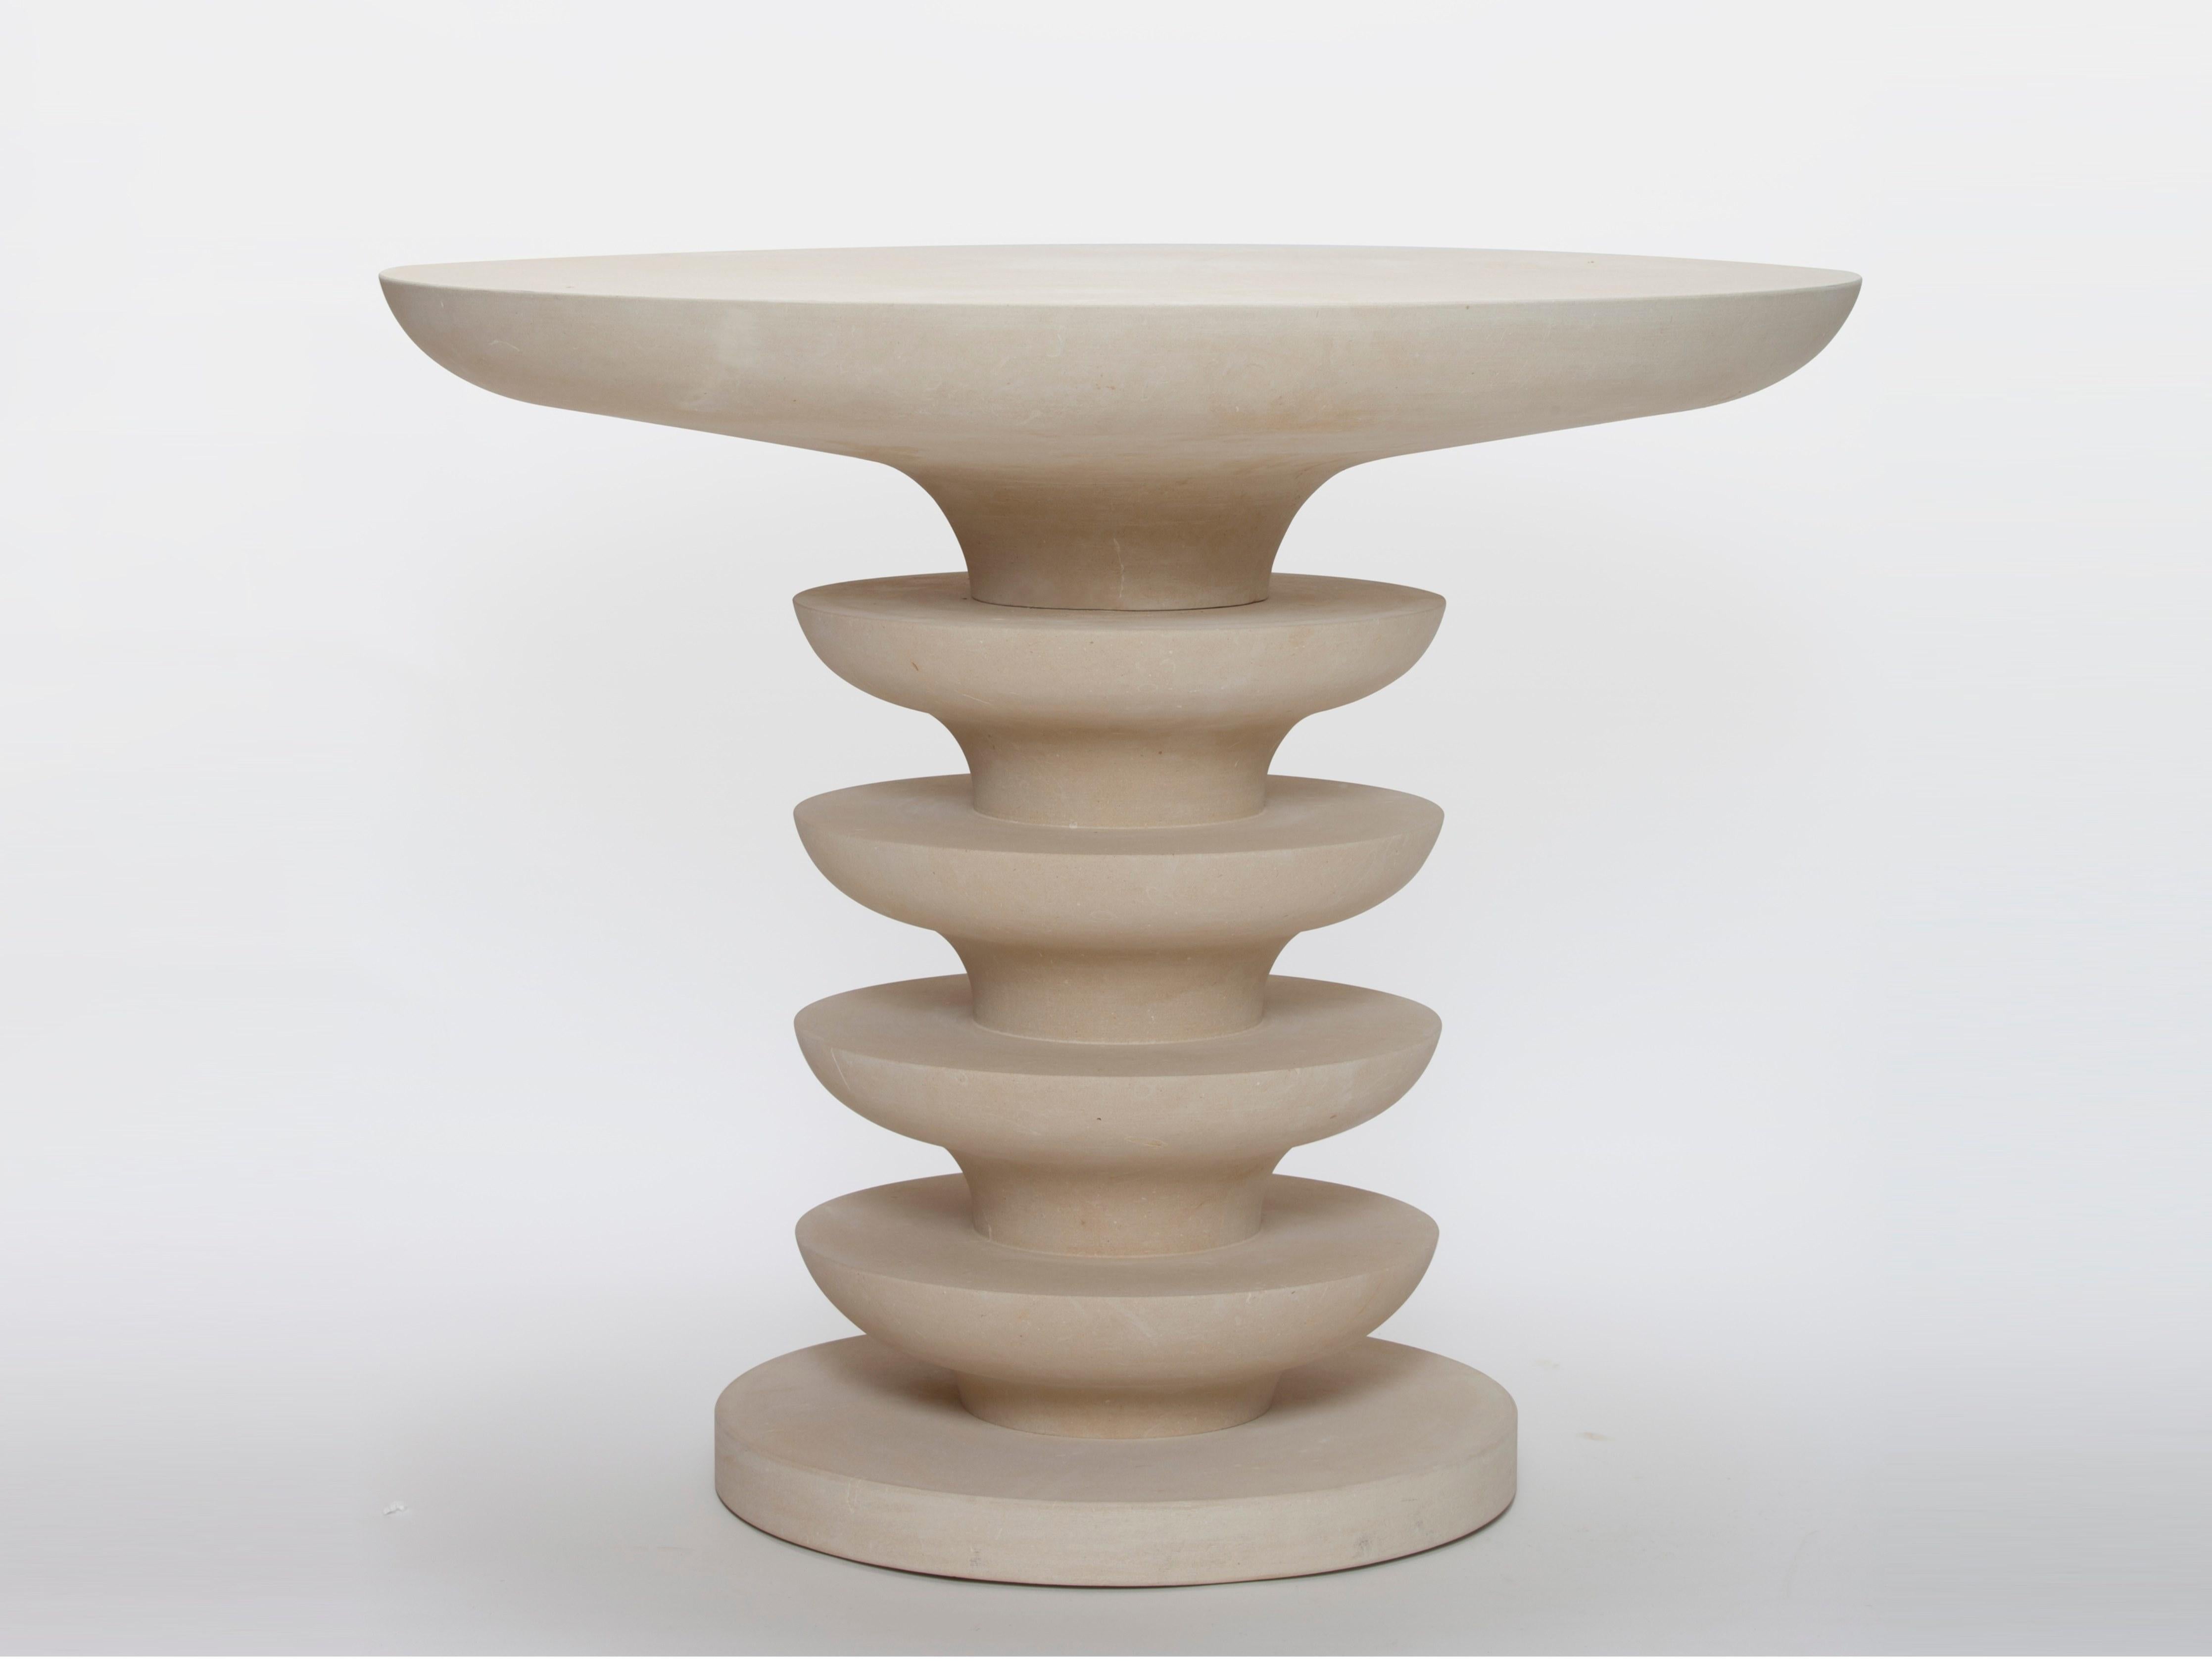 A sculptural beige limestone pedestal table suitable for indoor and outdoor settings.
Materials: limestone
Size: 90 cm diameter x 75 cm height
Weight: 250 lbs
Made In Italy.
Please contact us if you have any questions about customization and